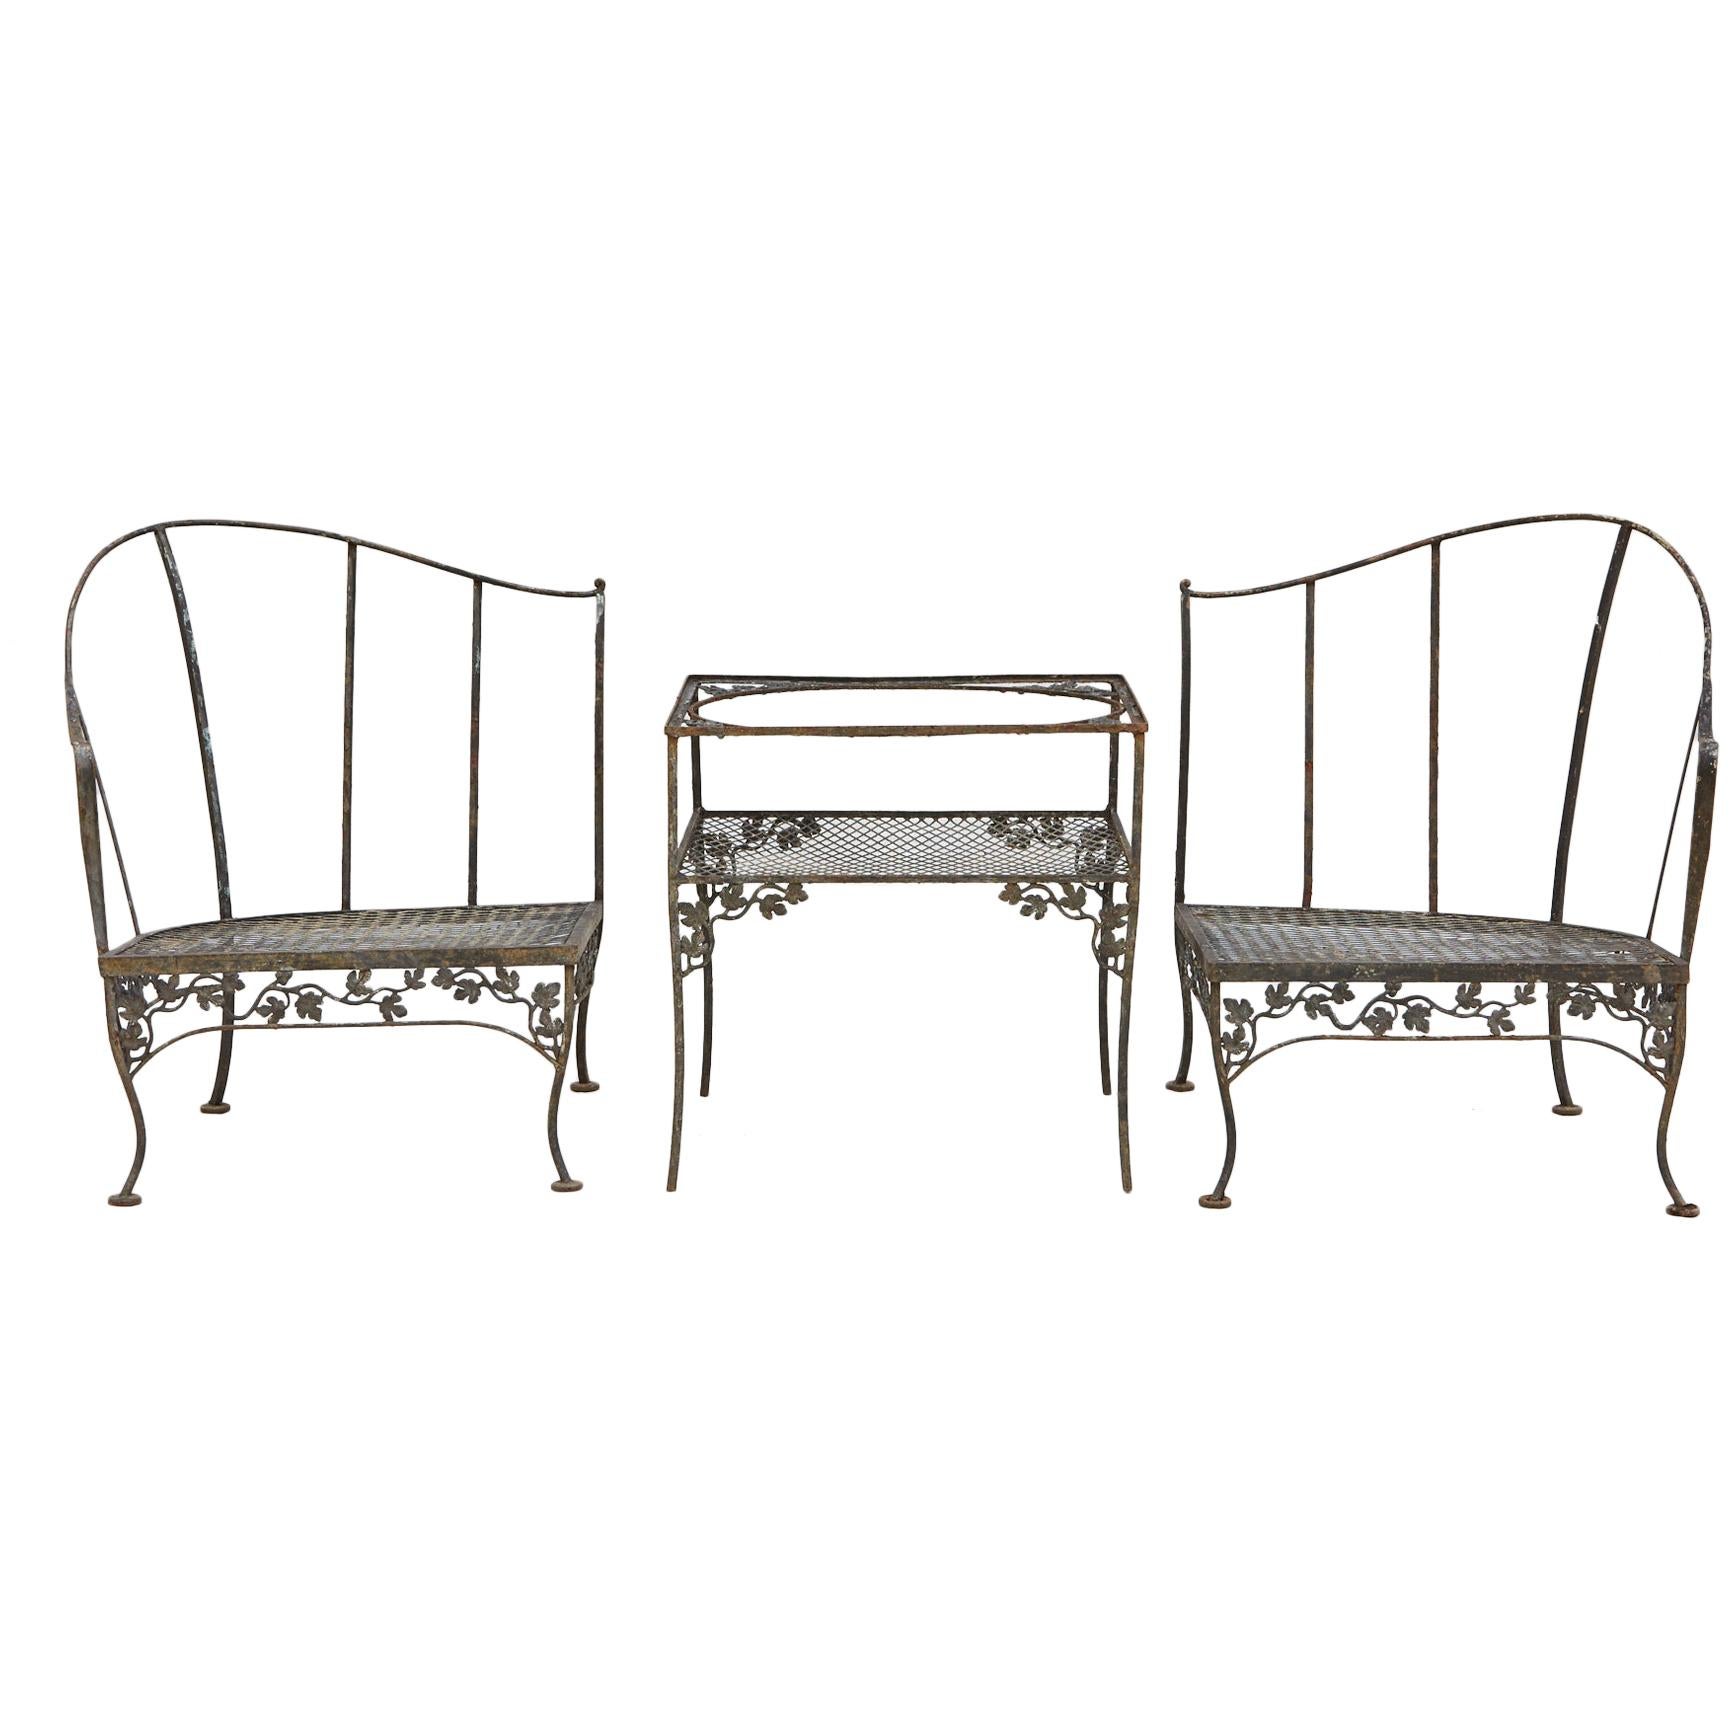 Grouping of Woodard Wrought Iron Garden Corner Chairs with Matching Side Table